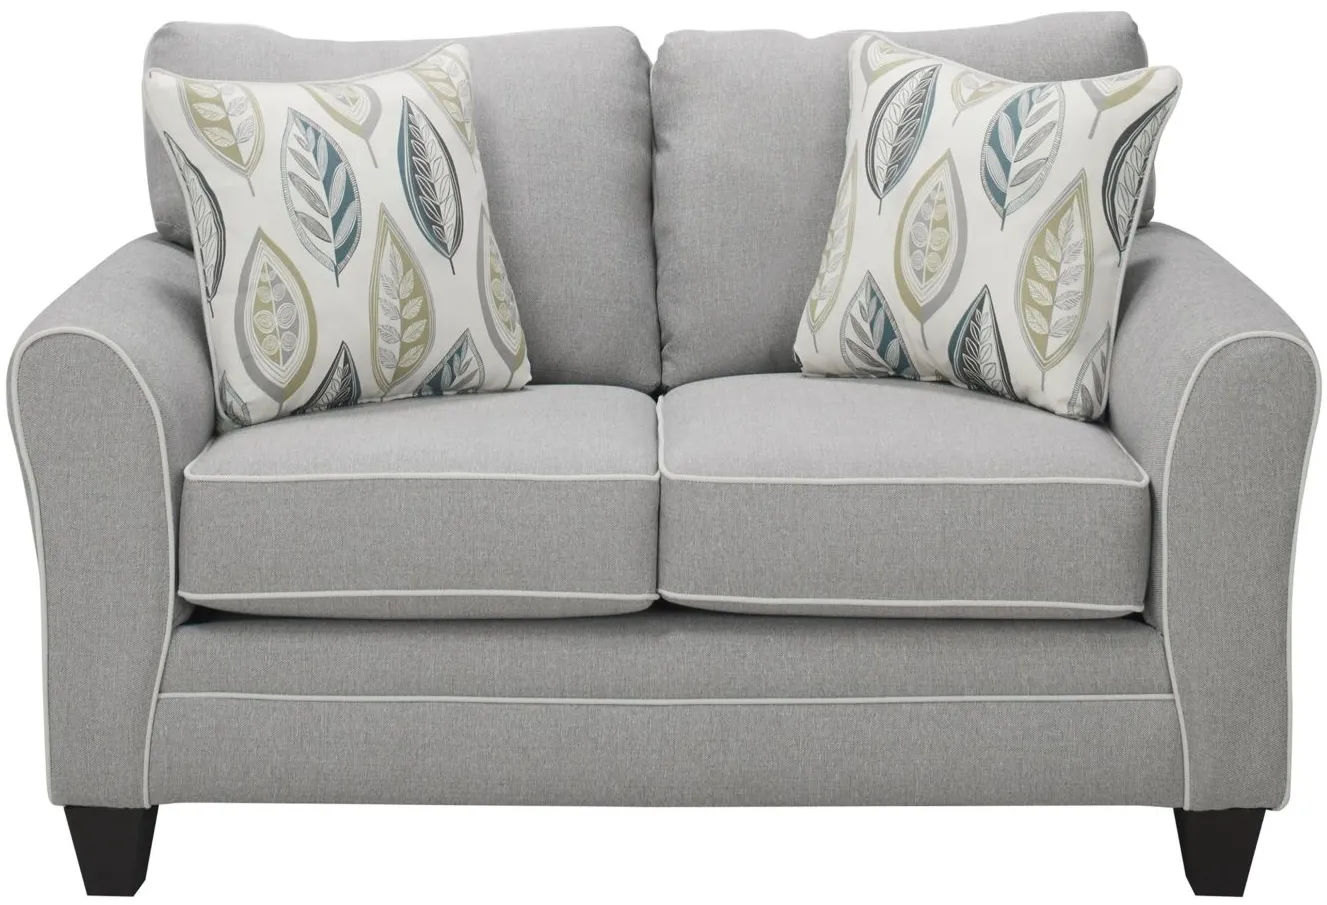 Bodey Loveseat in Gray by Fusion Furniture